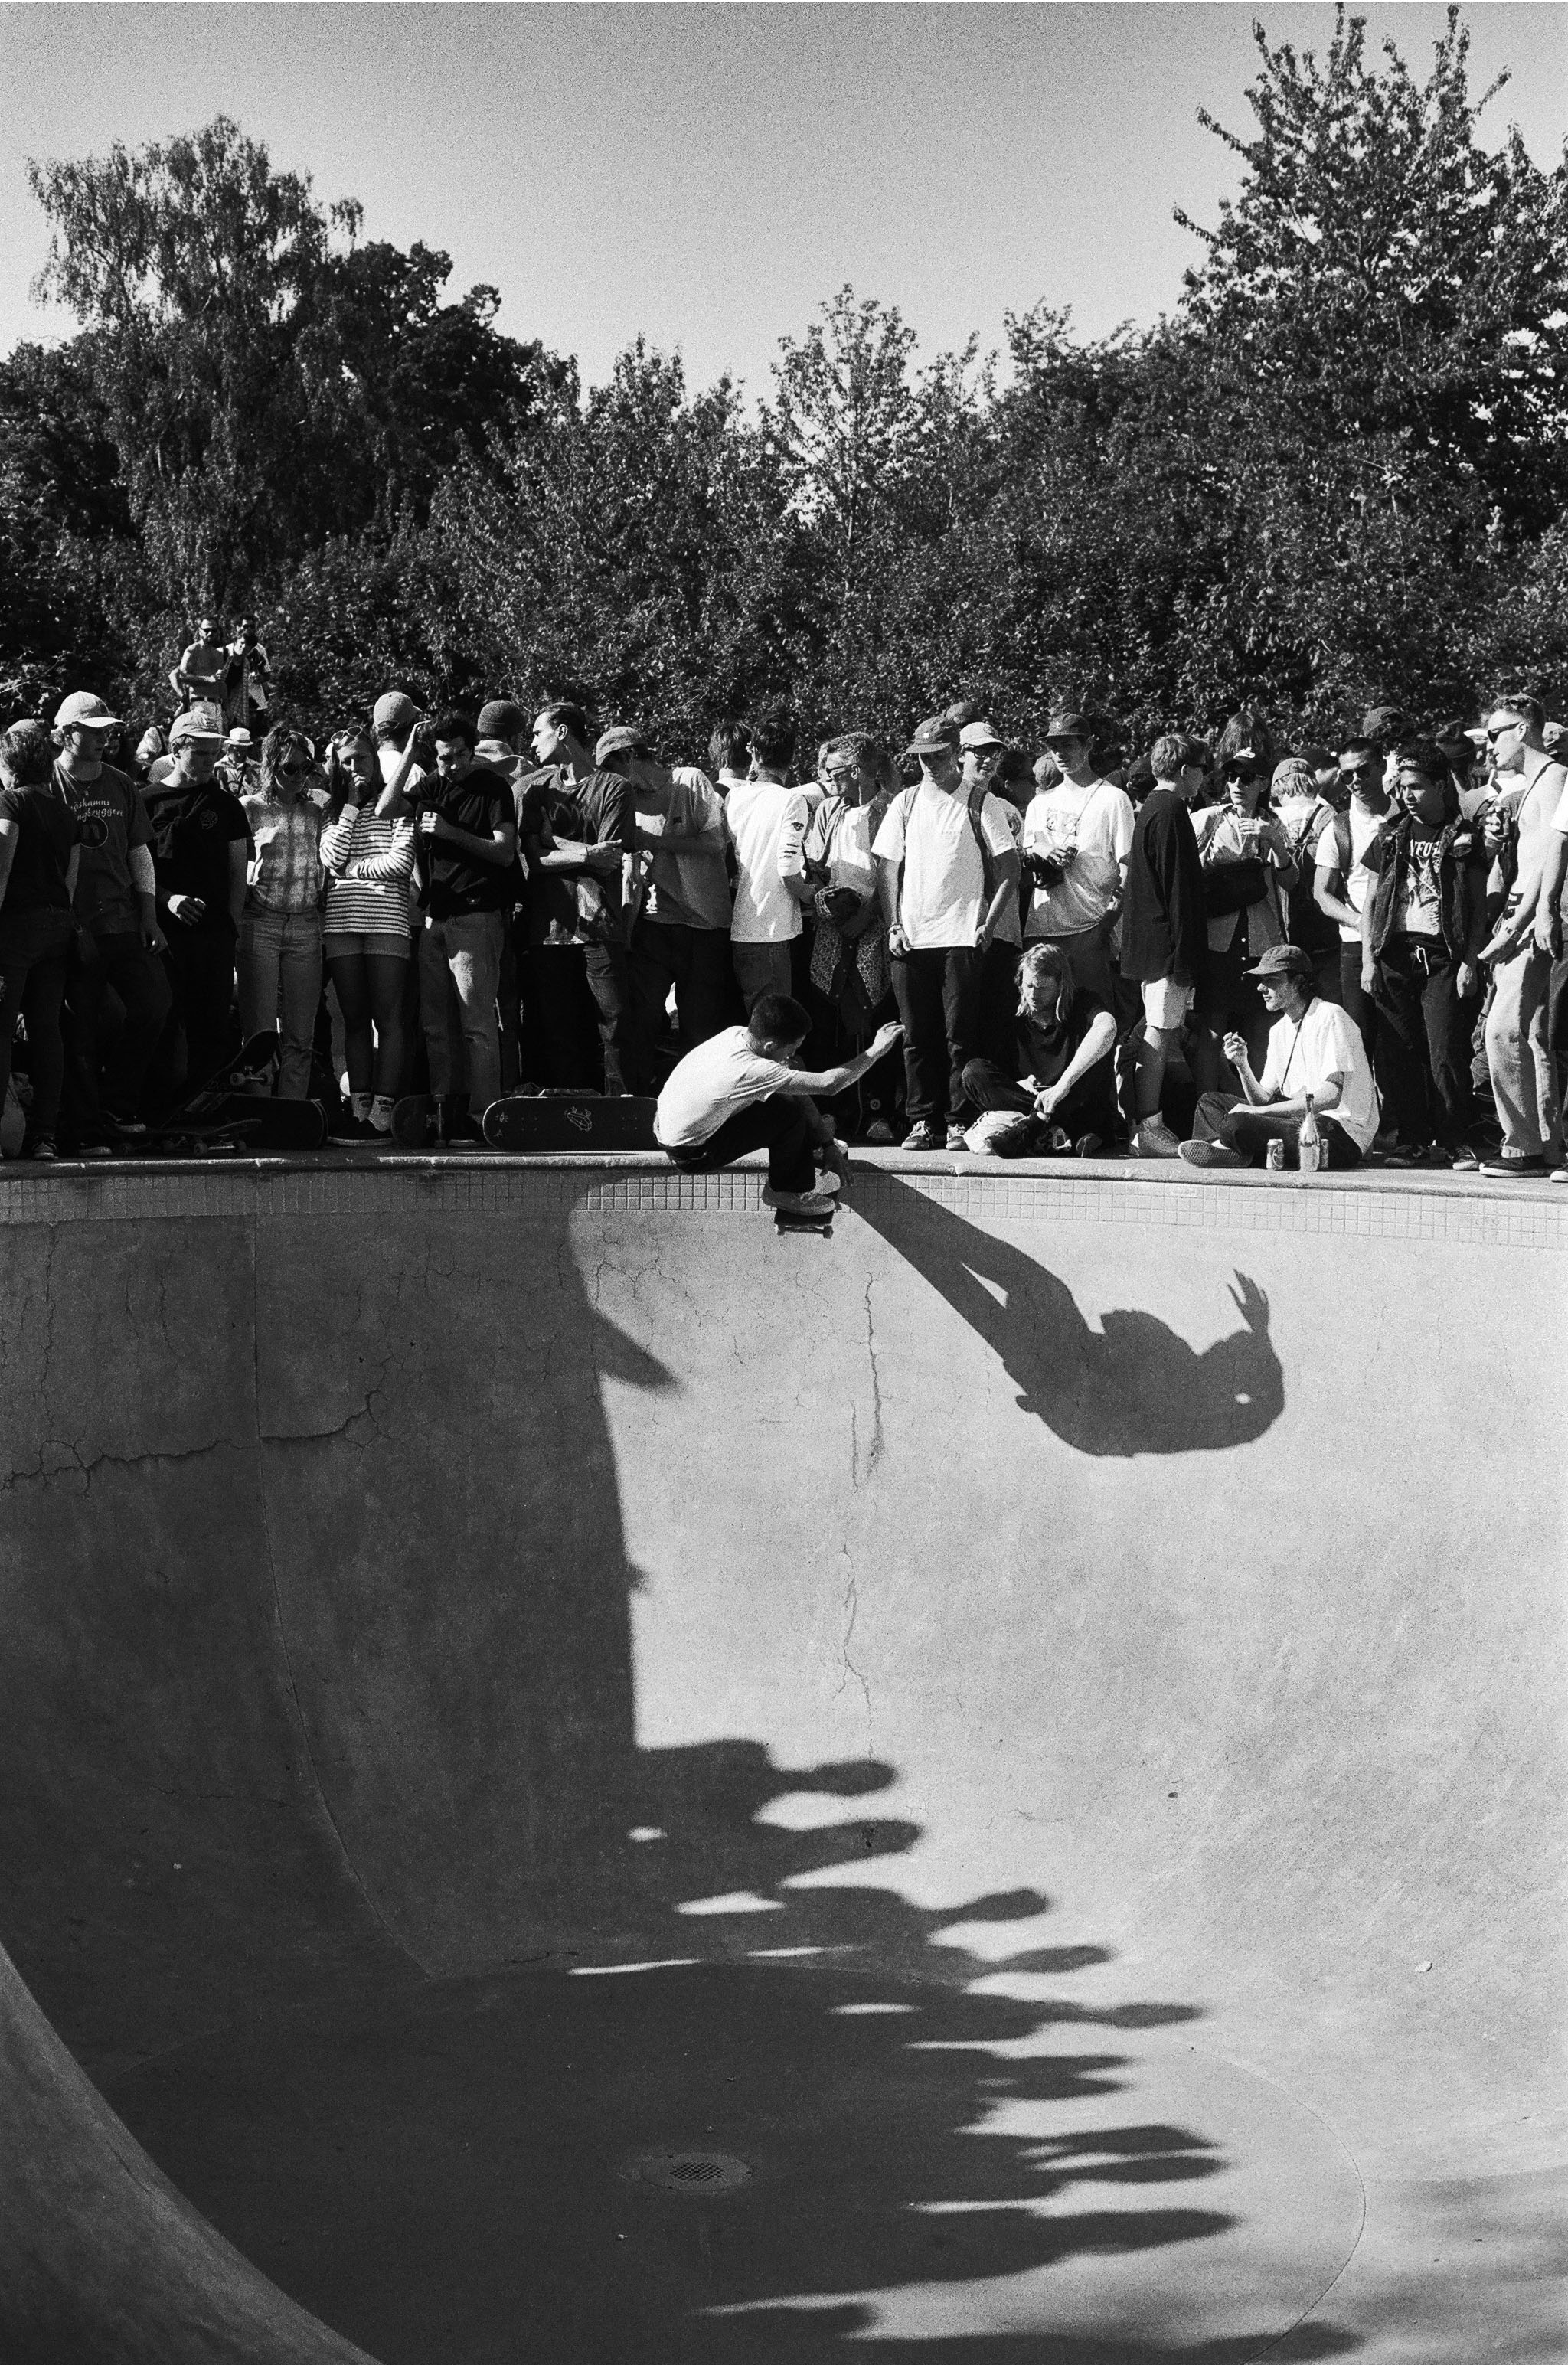 Unknown, fs crail. Photography by Yentl Touboul